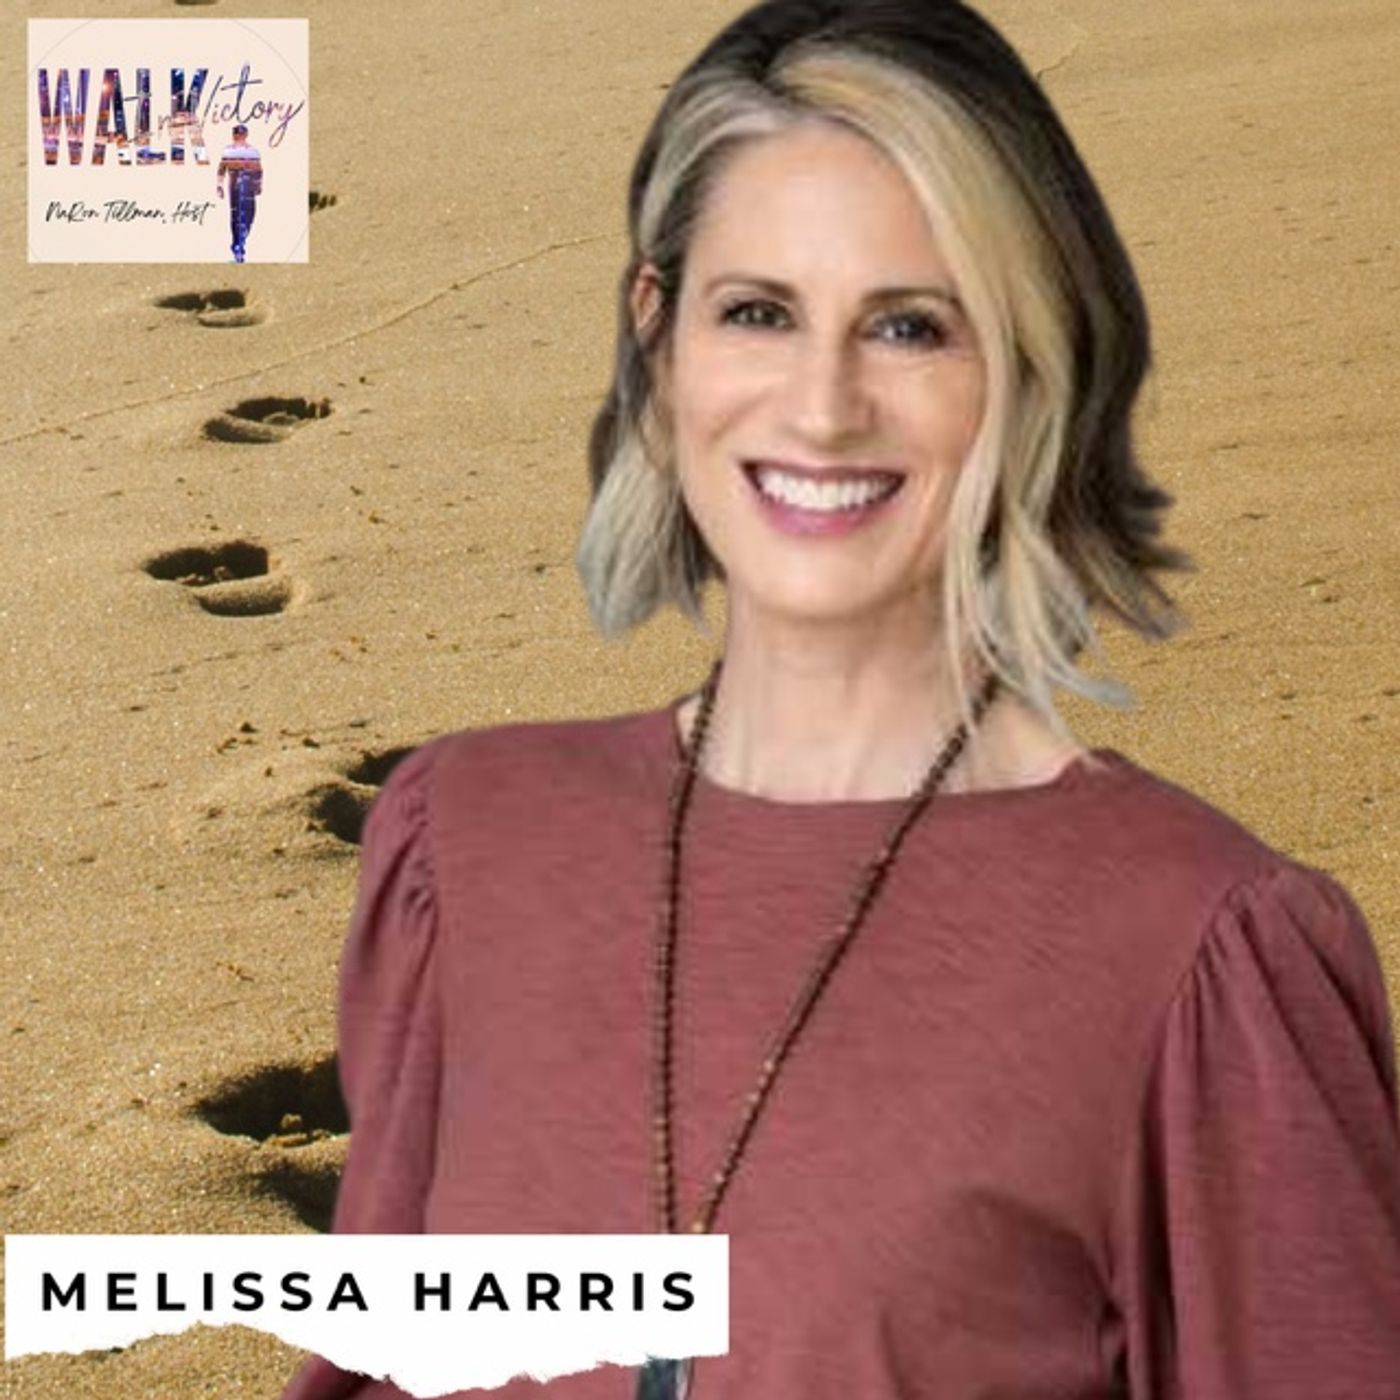 Beyond Obstacles: Building A Victorious Life Conversation With Melissa Harris